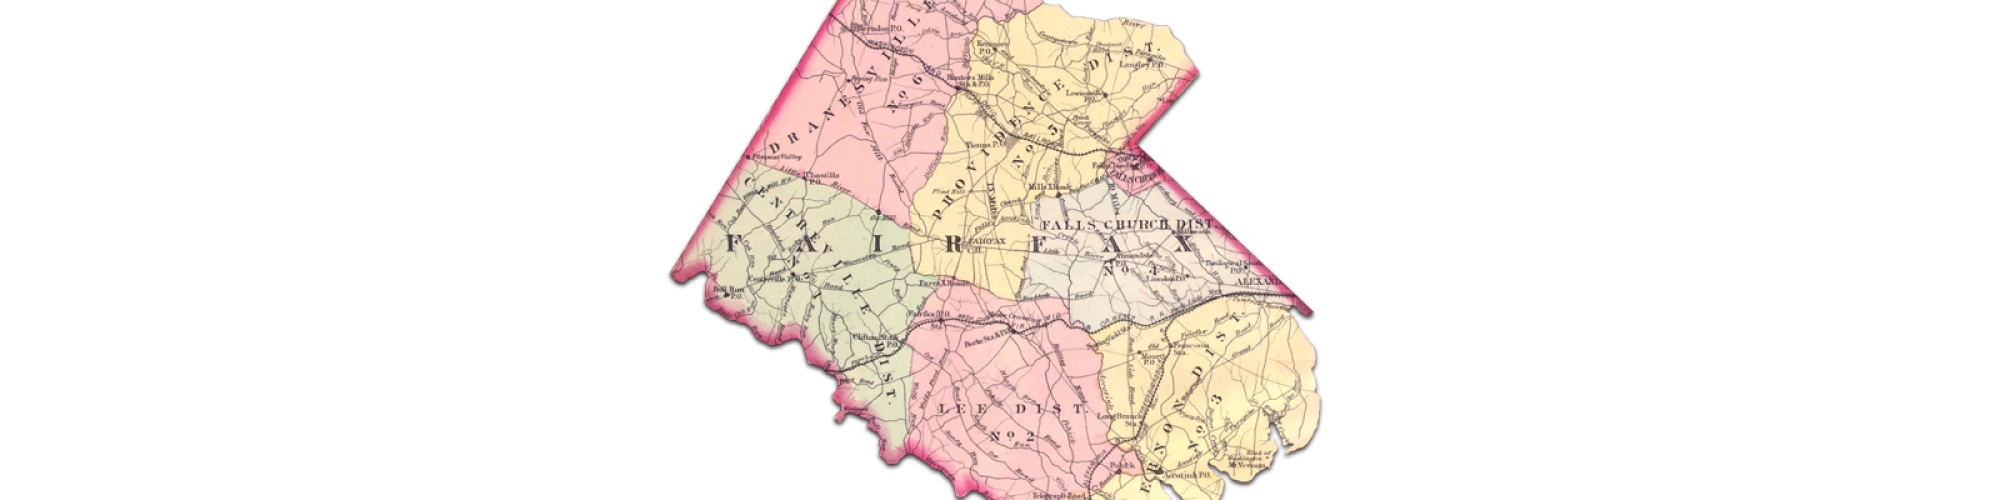 Map of Fairfax County printed in 1878.